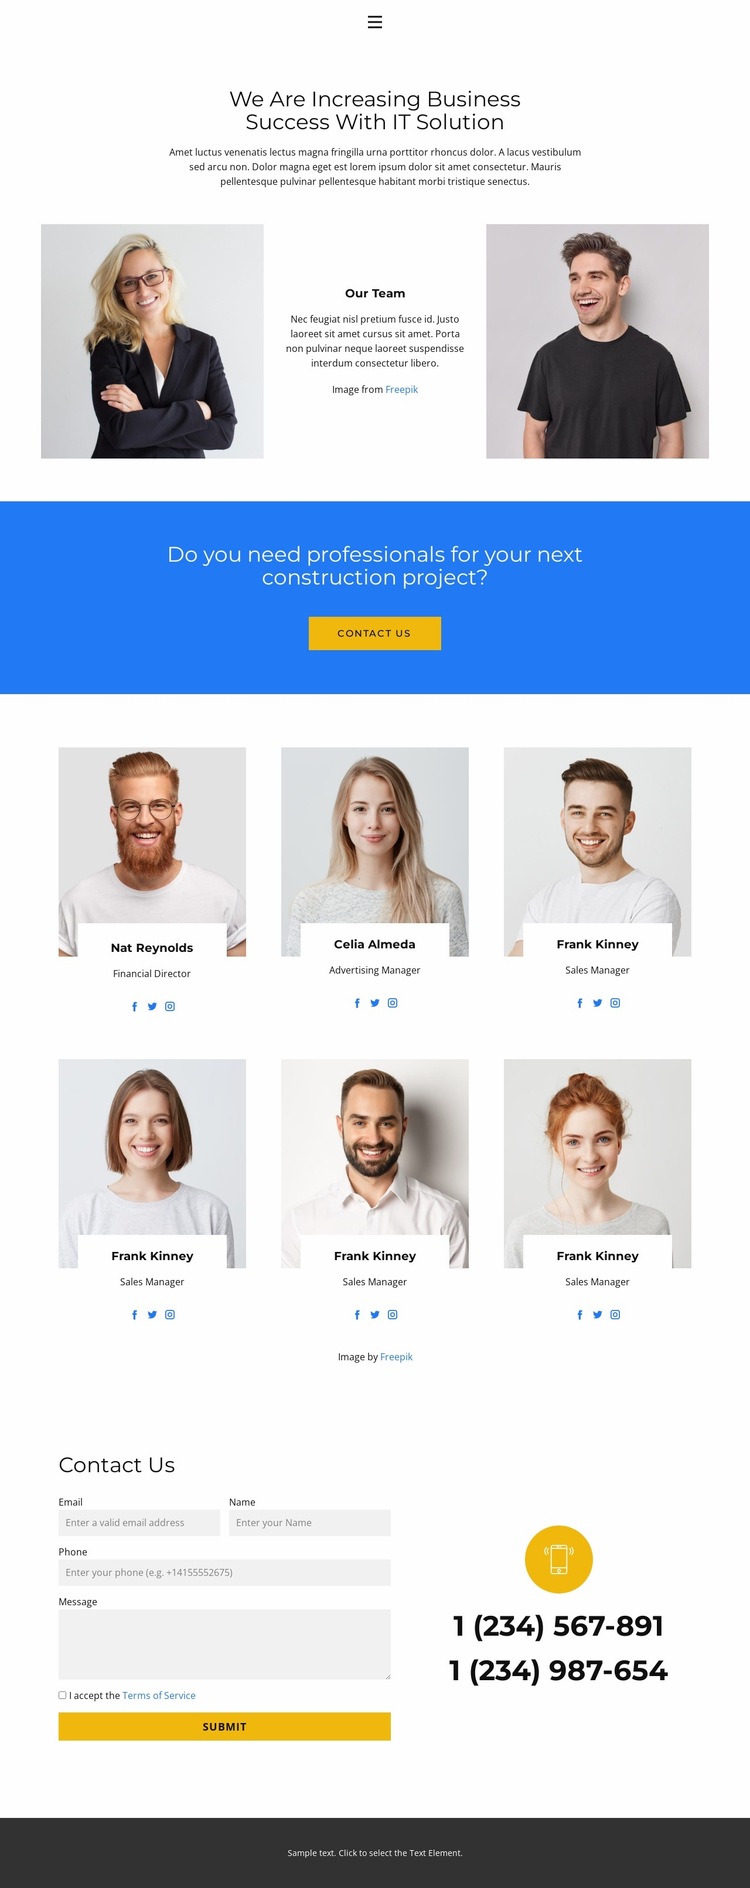 The best of the team Website Builder Templates